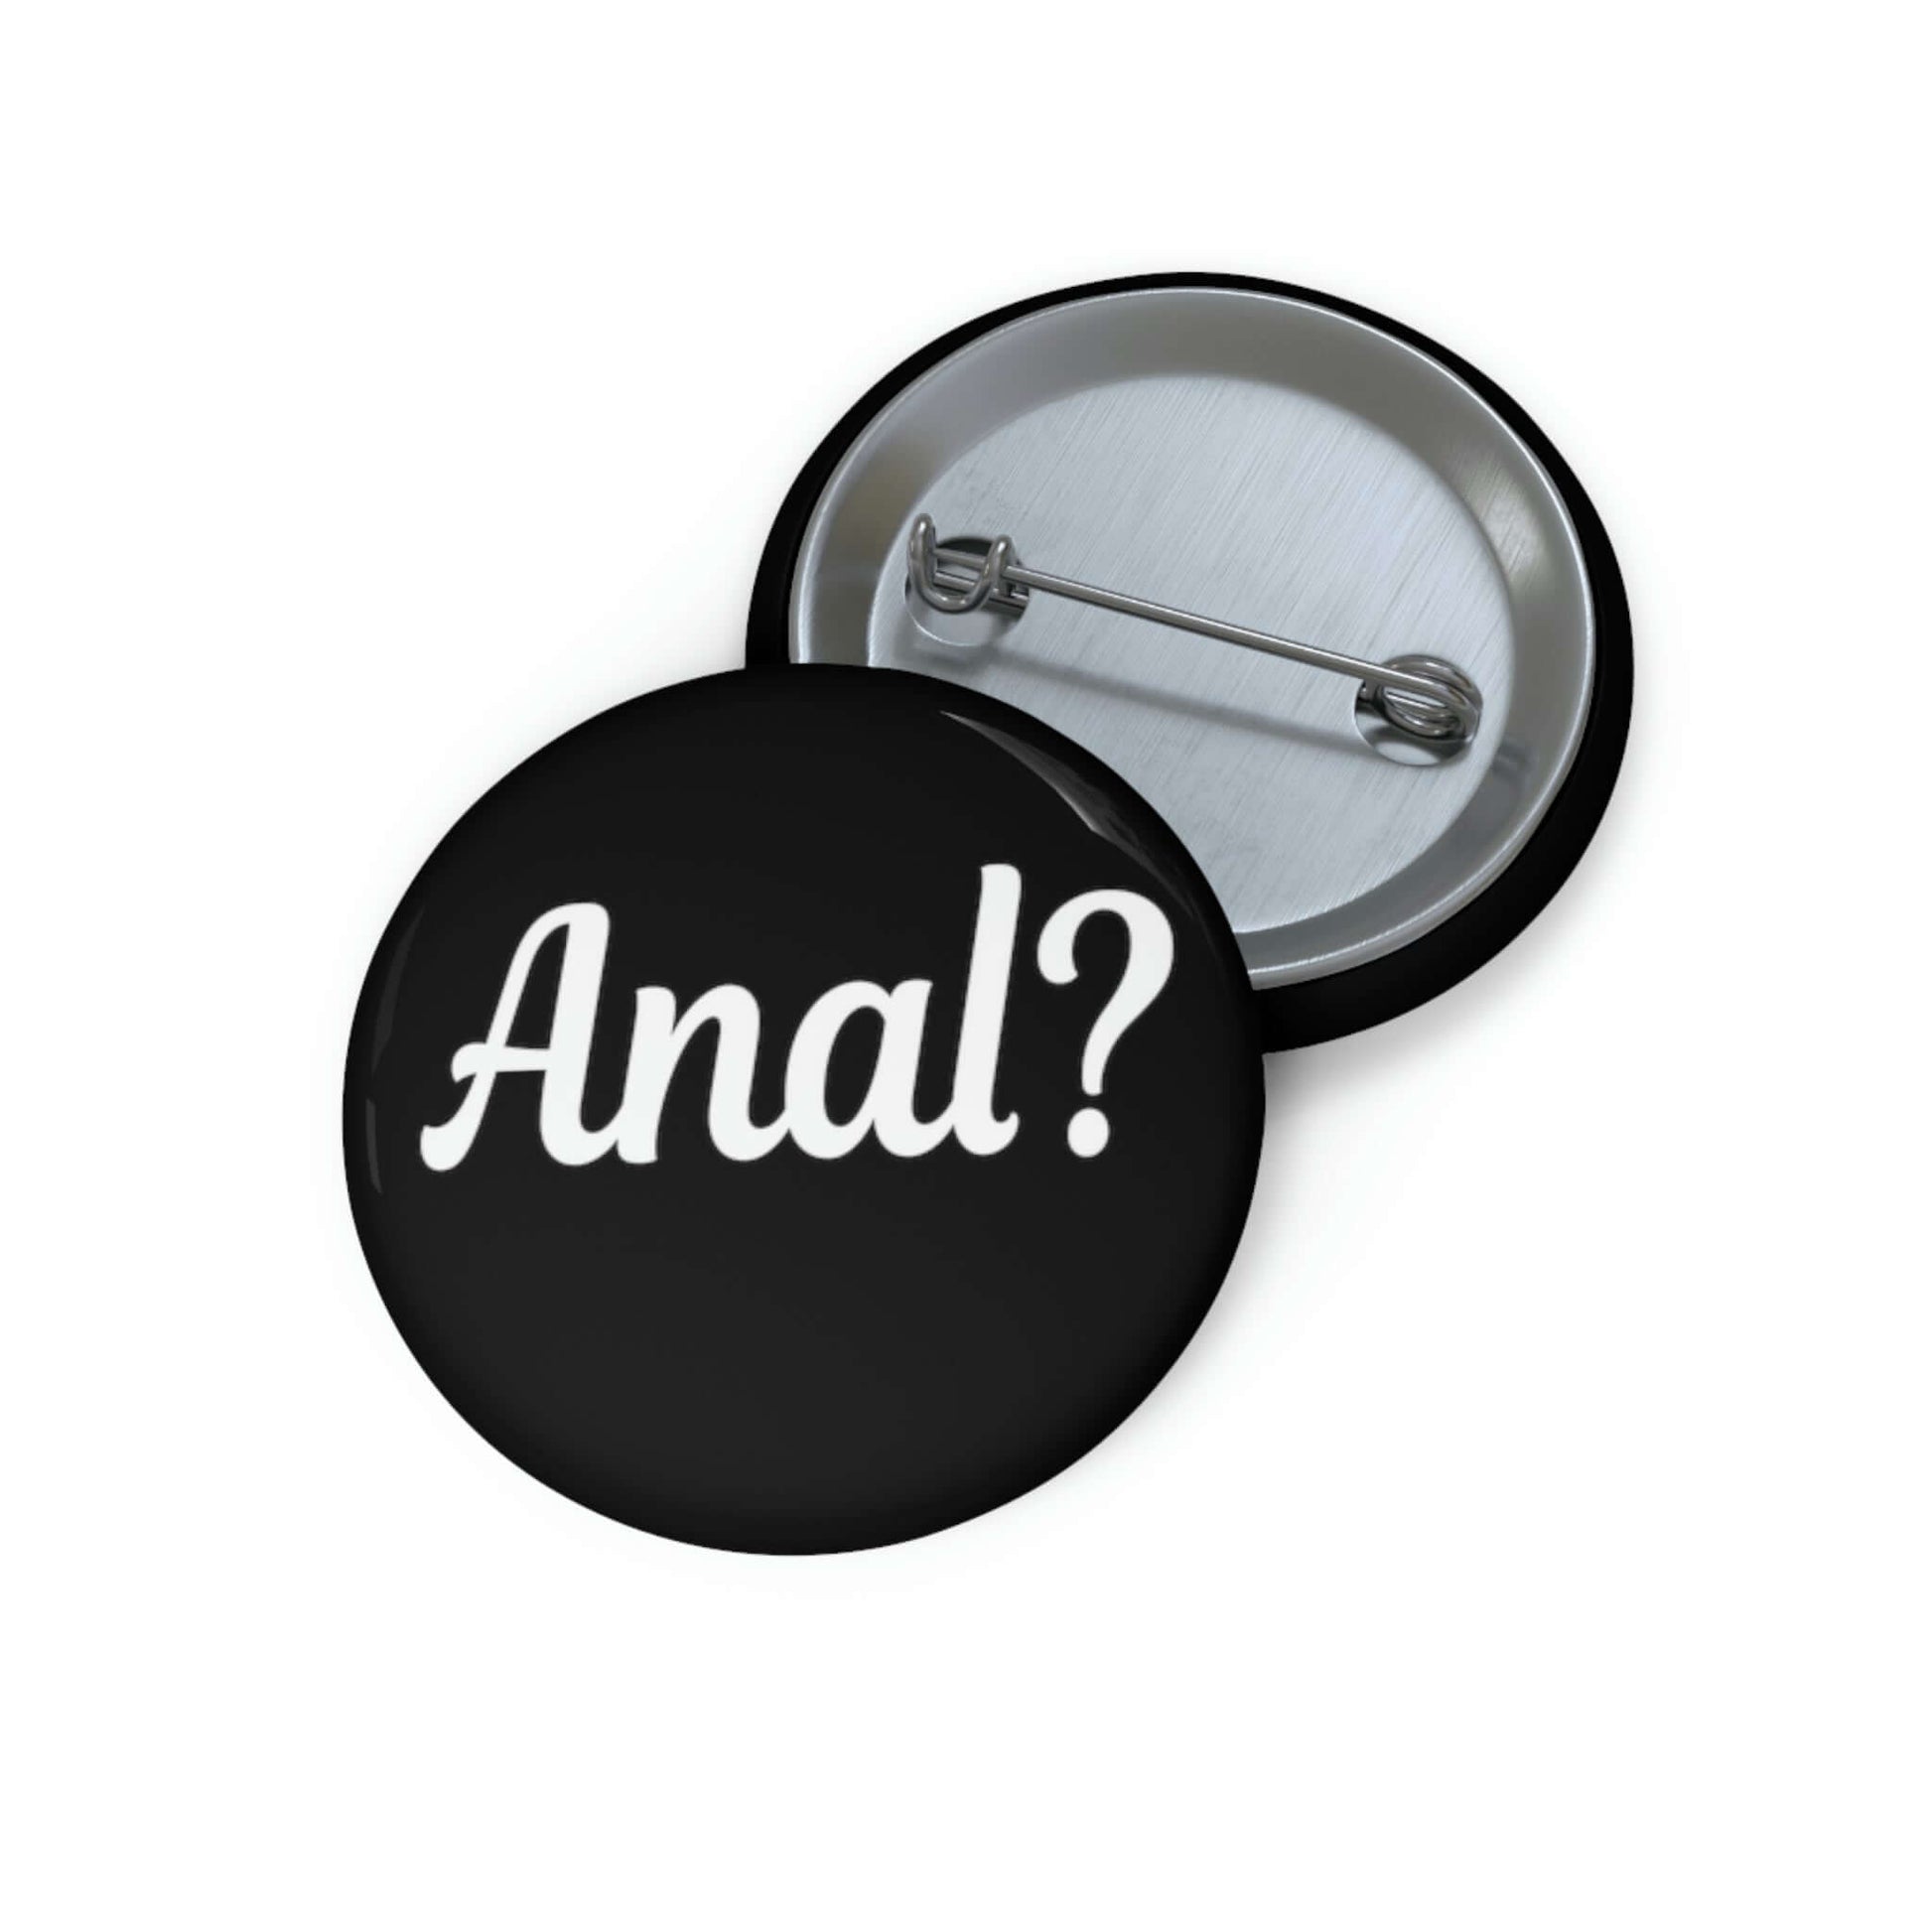 Pinback button that says Anal with a question mark